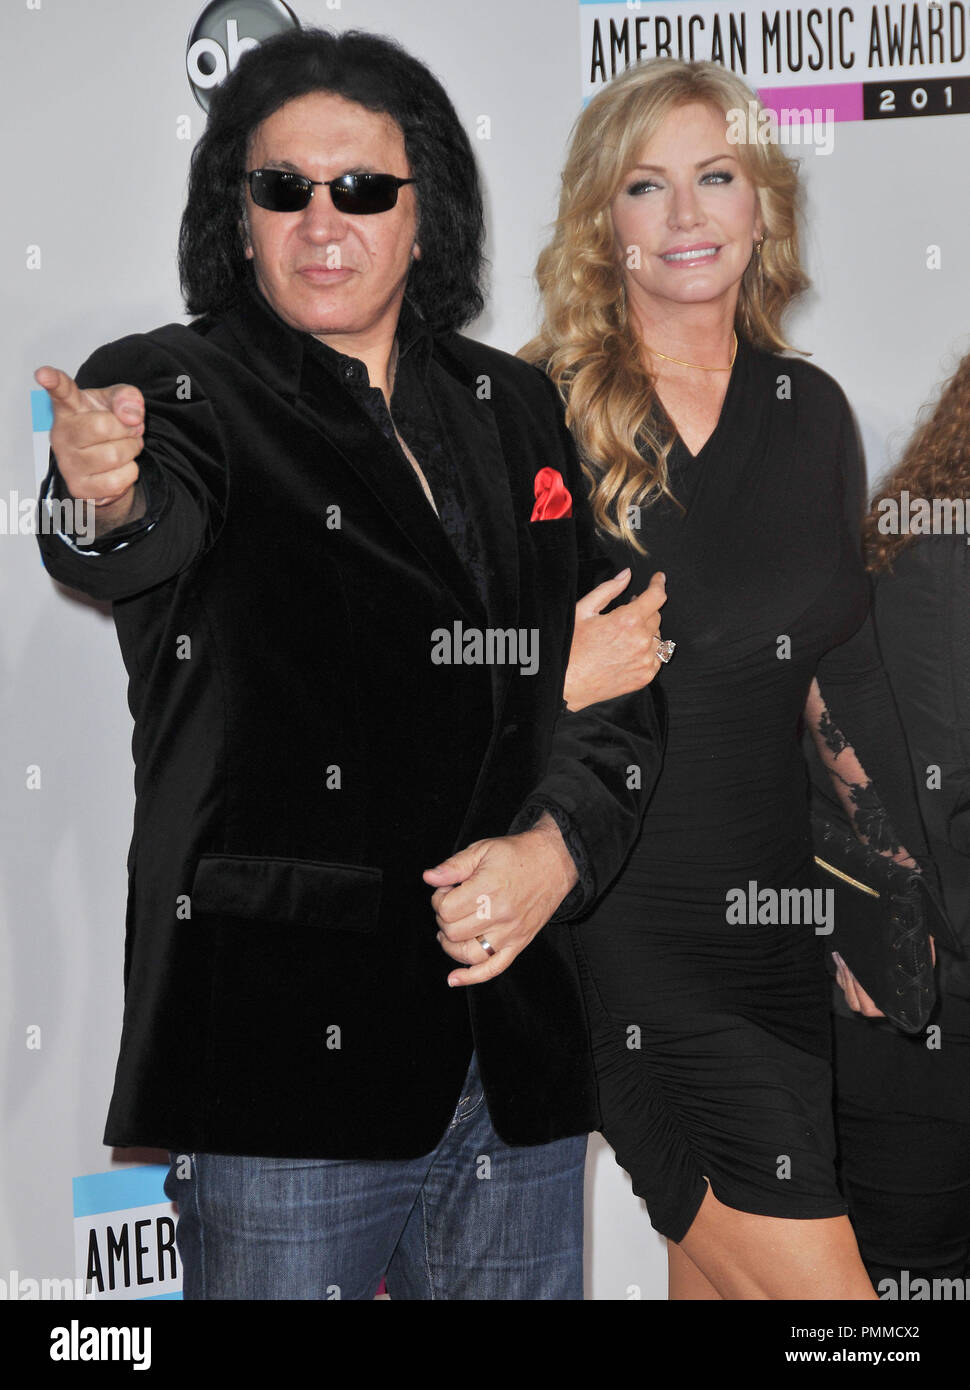 Gene Simmons and Shannon Tweed at the arrivals of The 2011 American Music Awards held at the Nokia Theatre L.A. Live in Los Angeles, CA. The event took place on Sunday, November 21, 2011. Photo by PRPP /  PictureLux Stock Photo